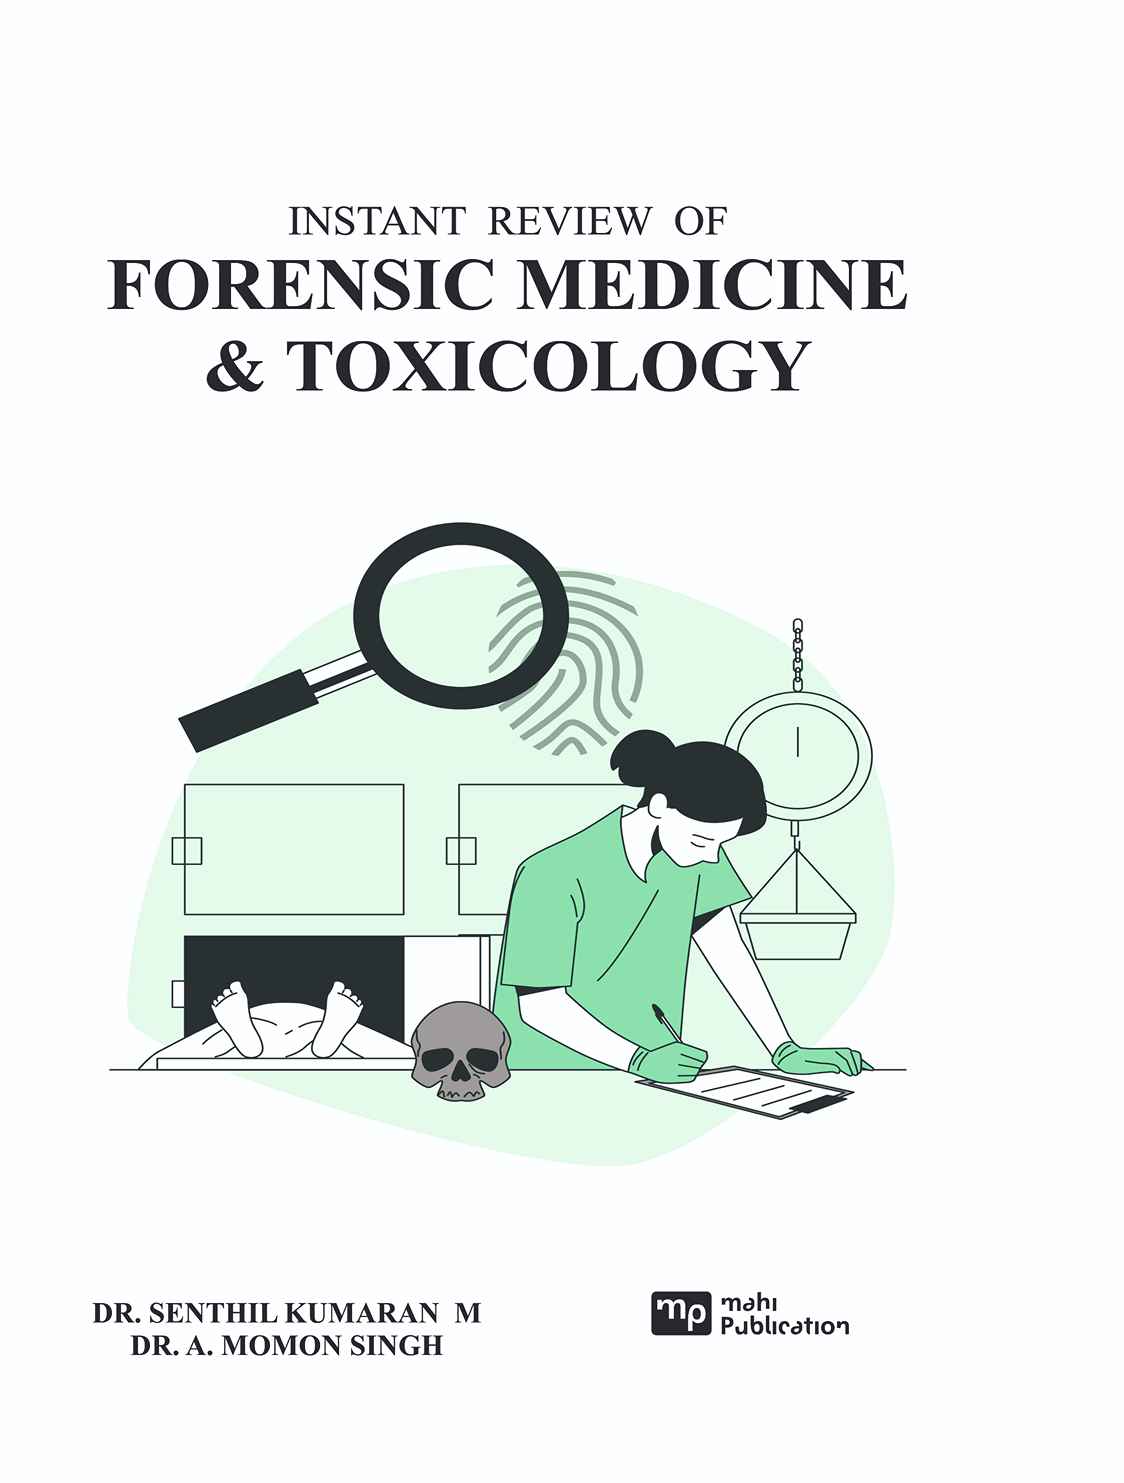  Instant Review of Forensic Medicine & Toxicology